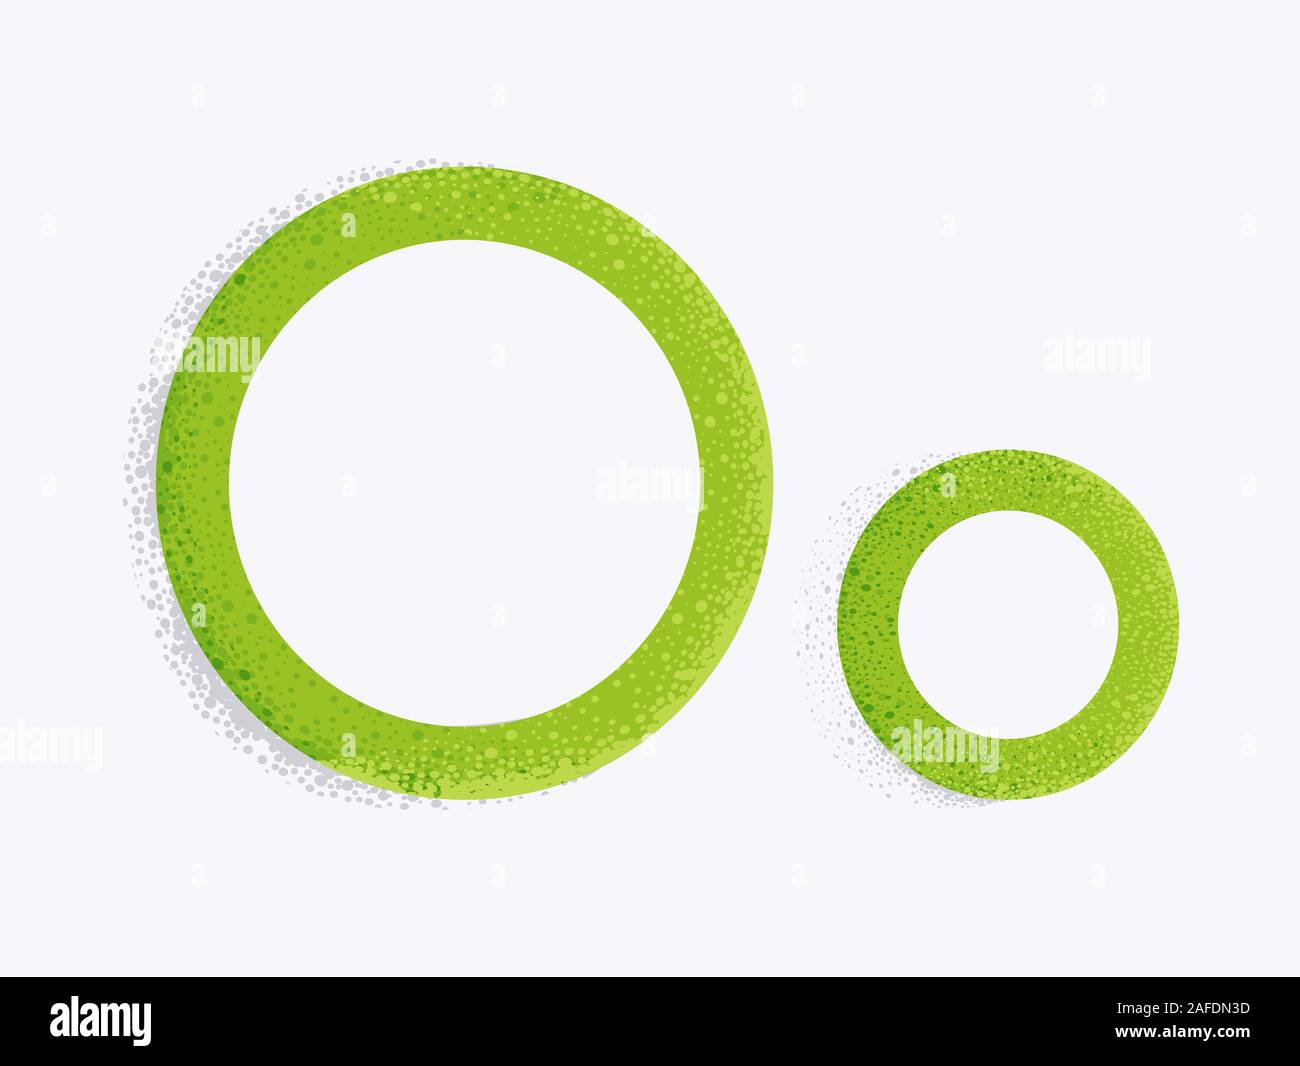 Illustration of Decorative Alphabet with Capital and Small Letter O and Dust Particle Effect Stock Photo